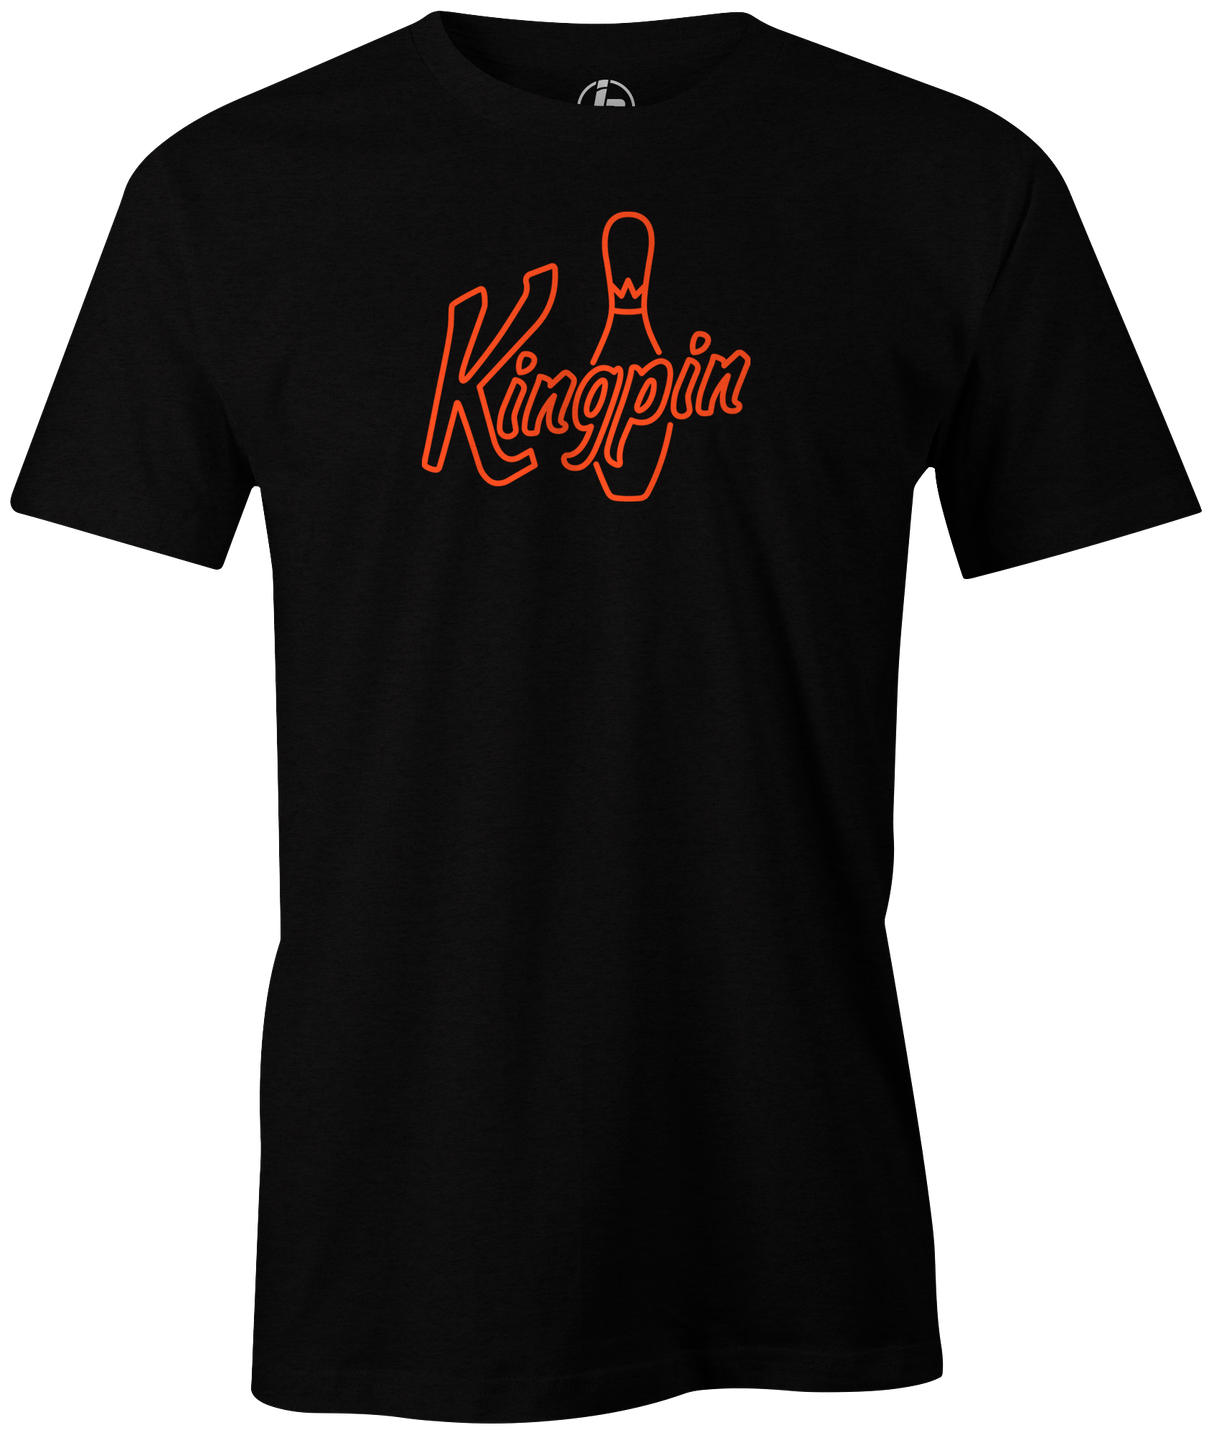 Whether you're a fan of the movie or bowling or both, this shirt covers it for ya! You are the KINGPIN. Roy Munson is one of the most famous bowlers of all time. He was best known for being the 1979 Iowa State Amateur Champion. He later starred in the movie Kingpin where he faced off with rival Big Ern McCracken. Munson was also known as "Rubberman" as well as "Brother Munson." Pay tribute to the great Roy Munson with this tee shirt.